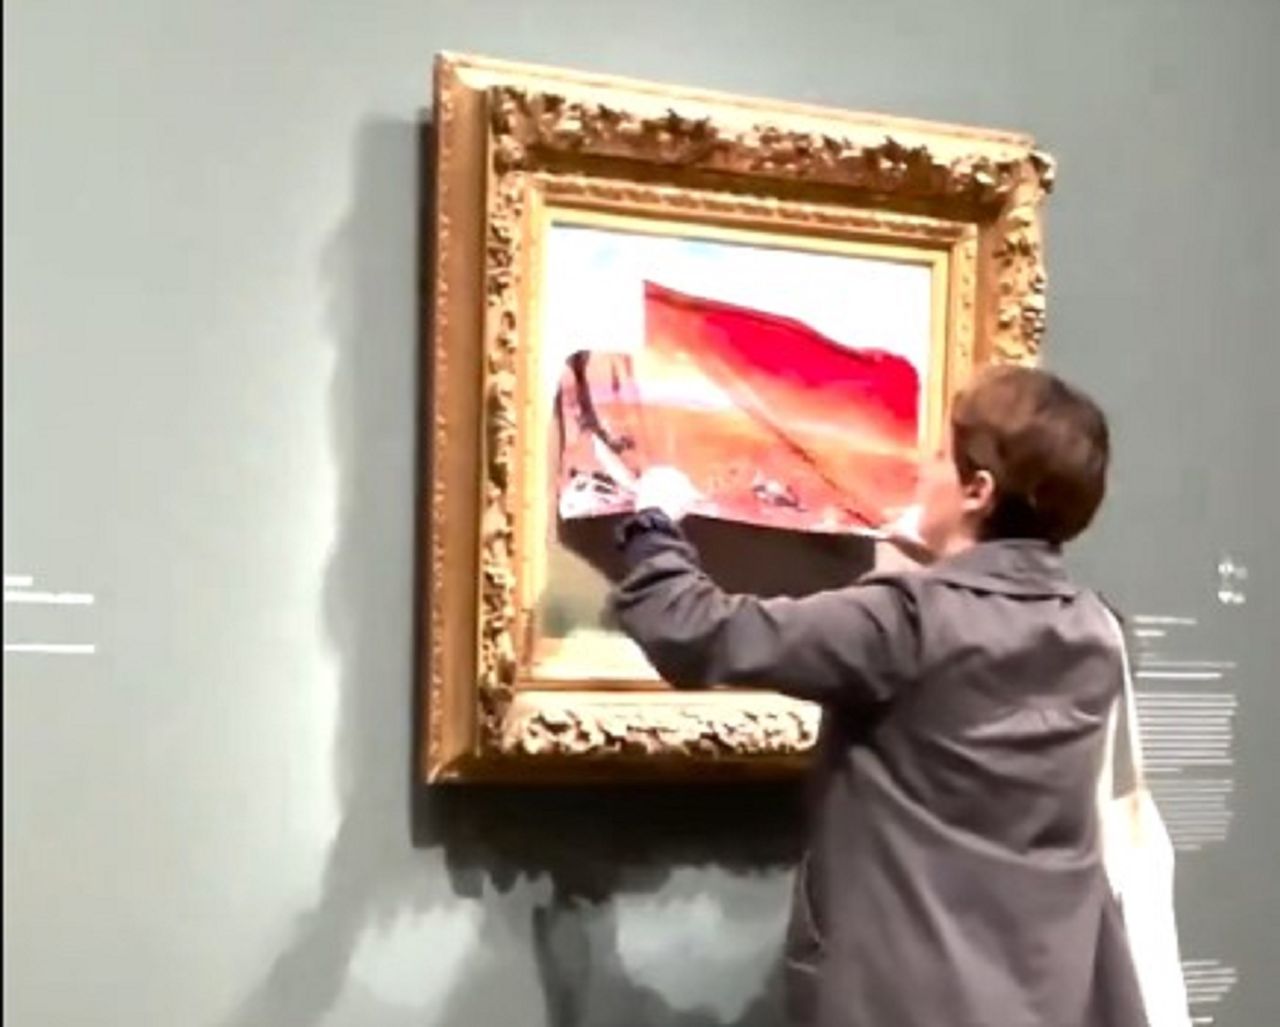 A climate activist taped over a famous painting.